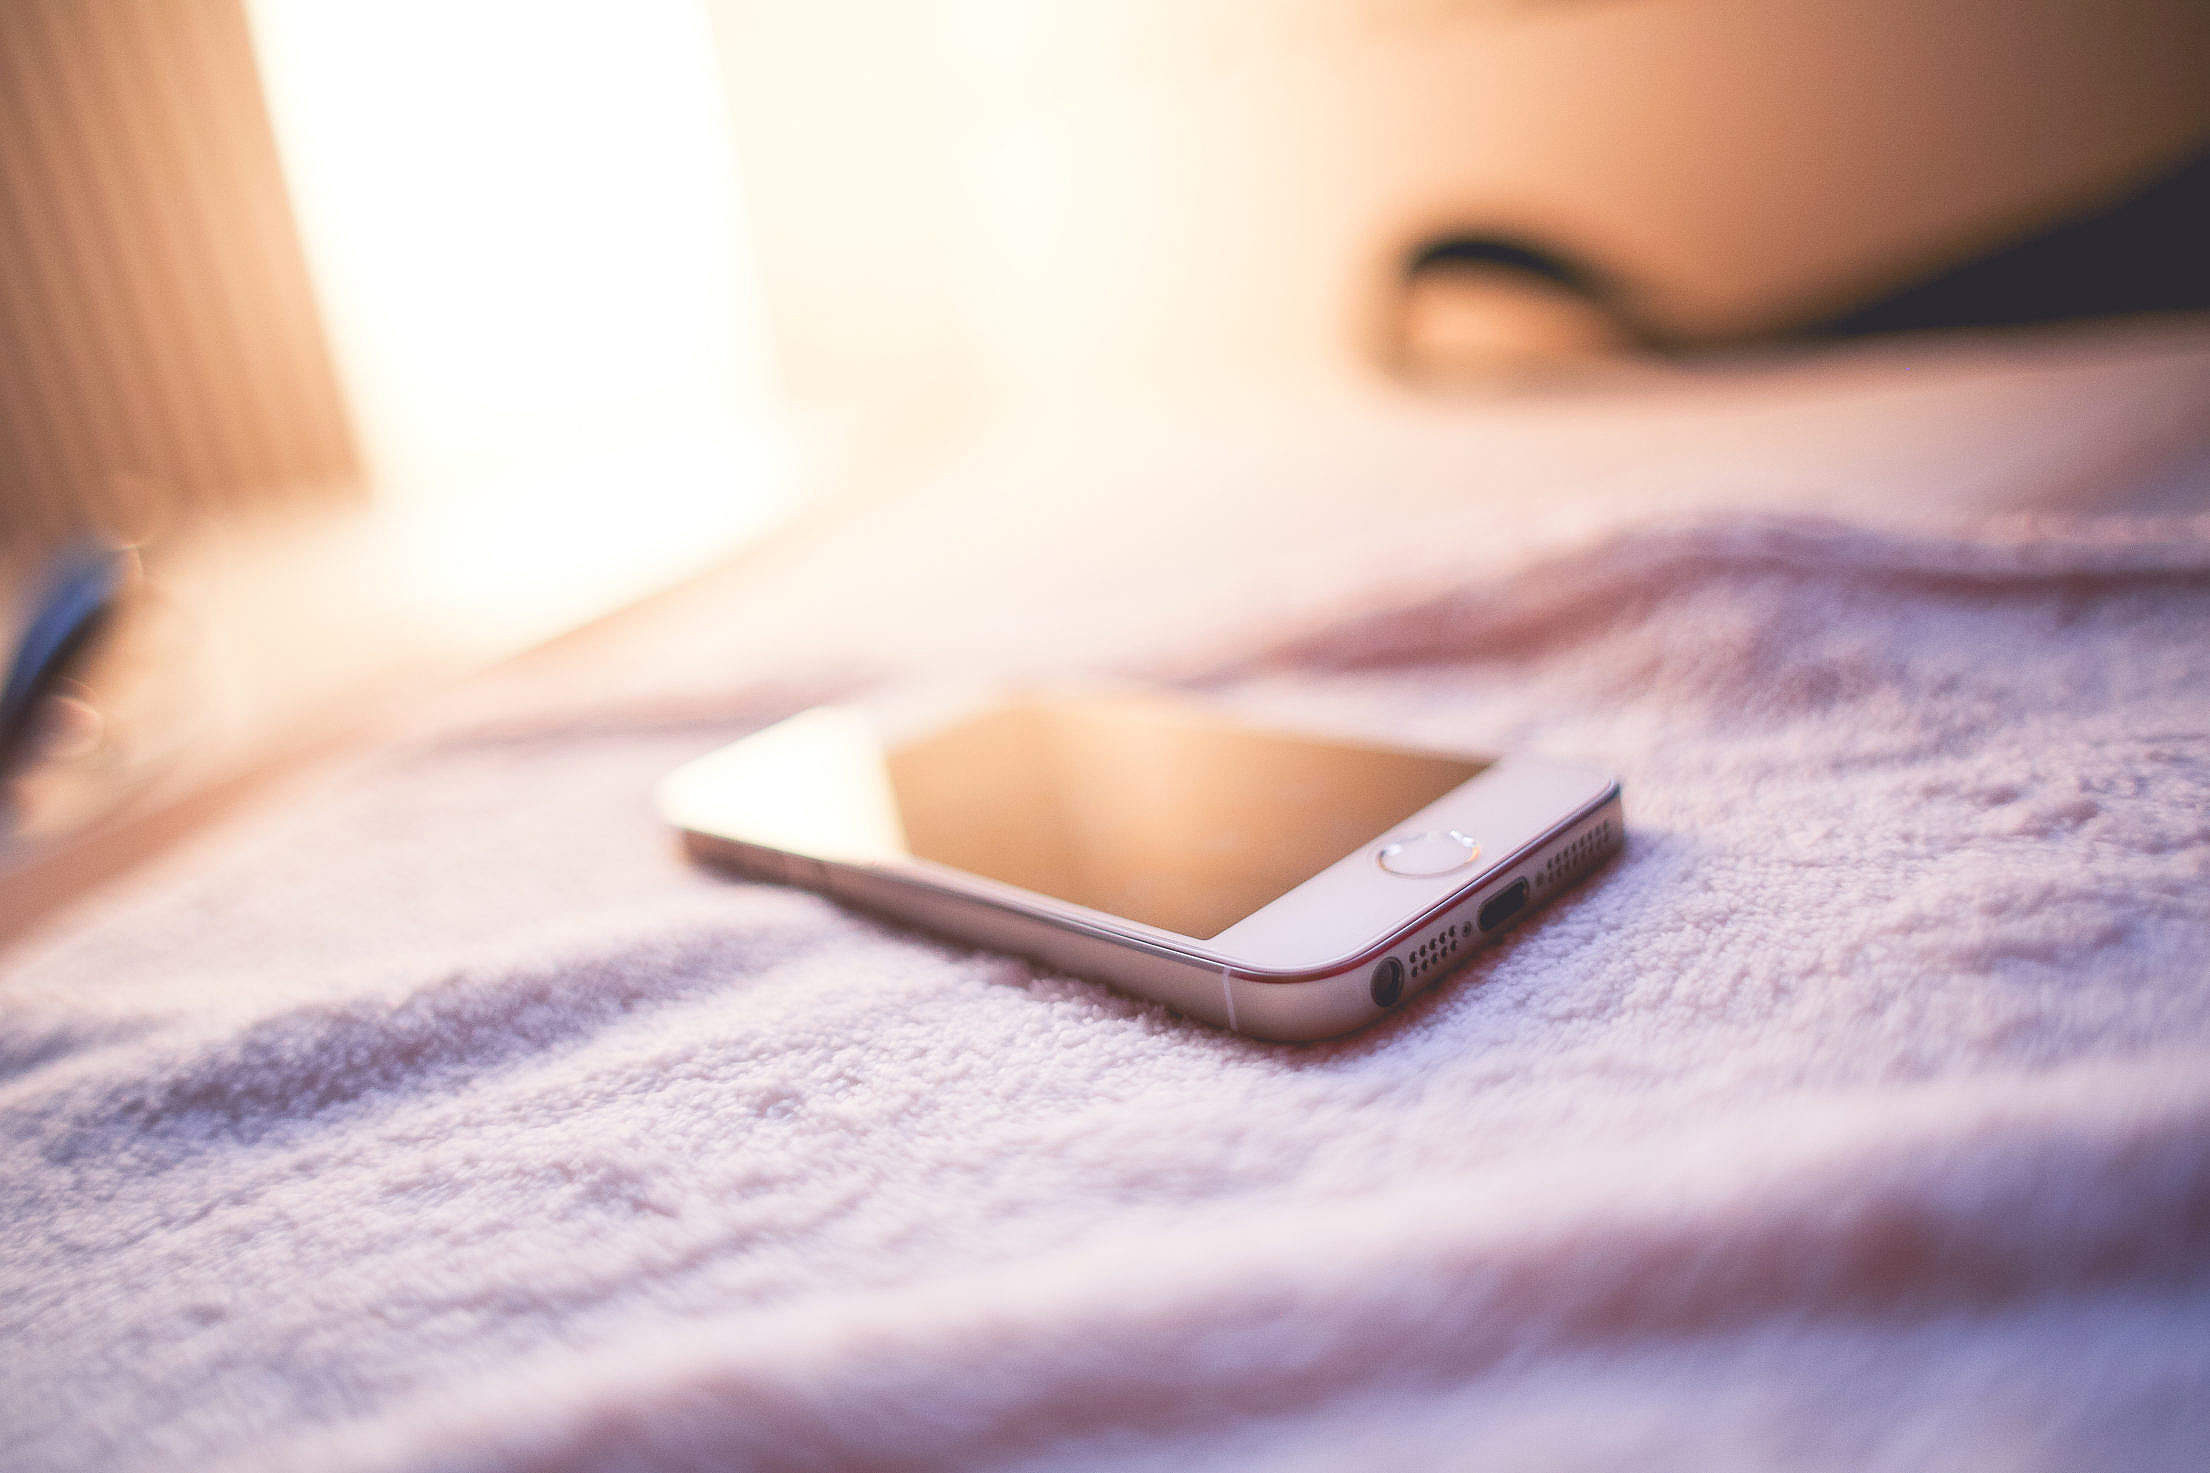 iPhone 5S Gold in a Bed Free Stock Photo